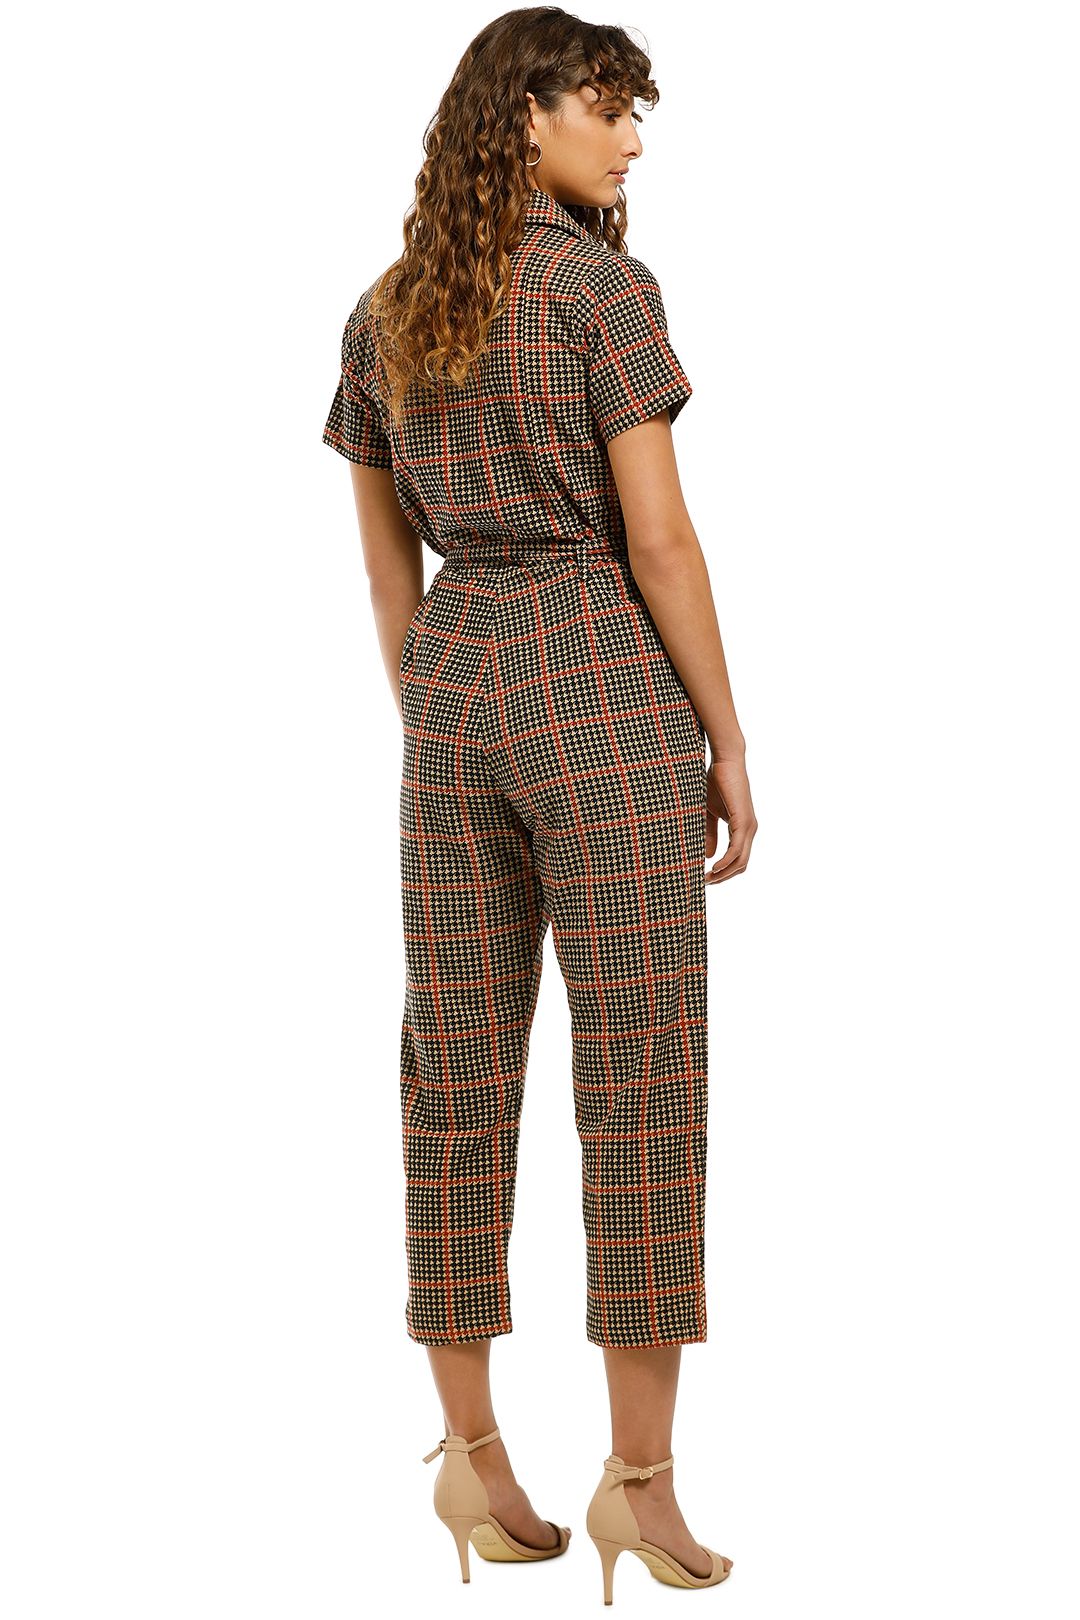 Rue-Stiic-Alamere-Worksuit-Houndstooth-Back